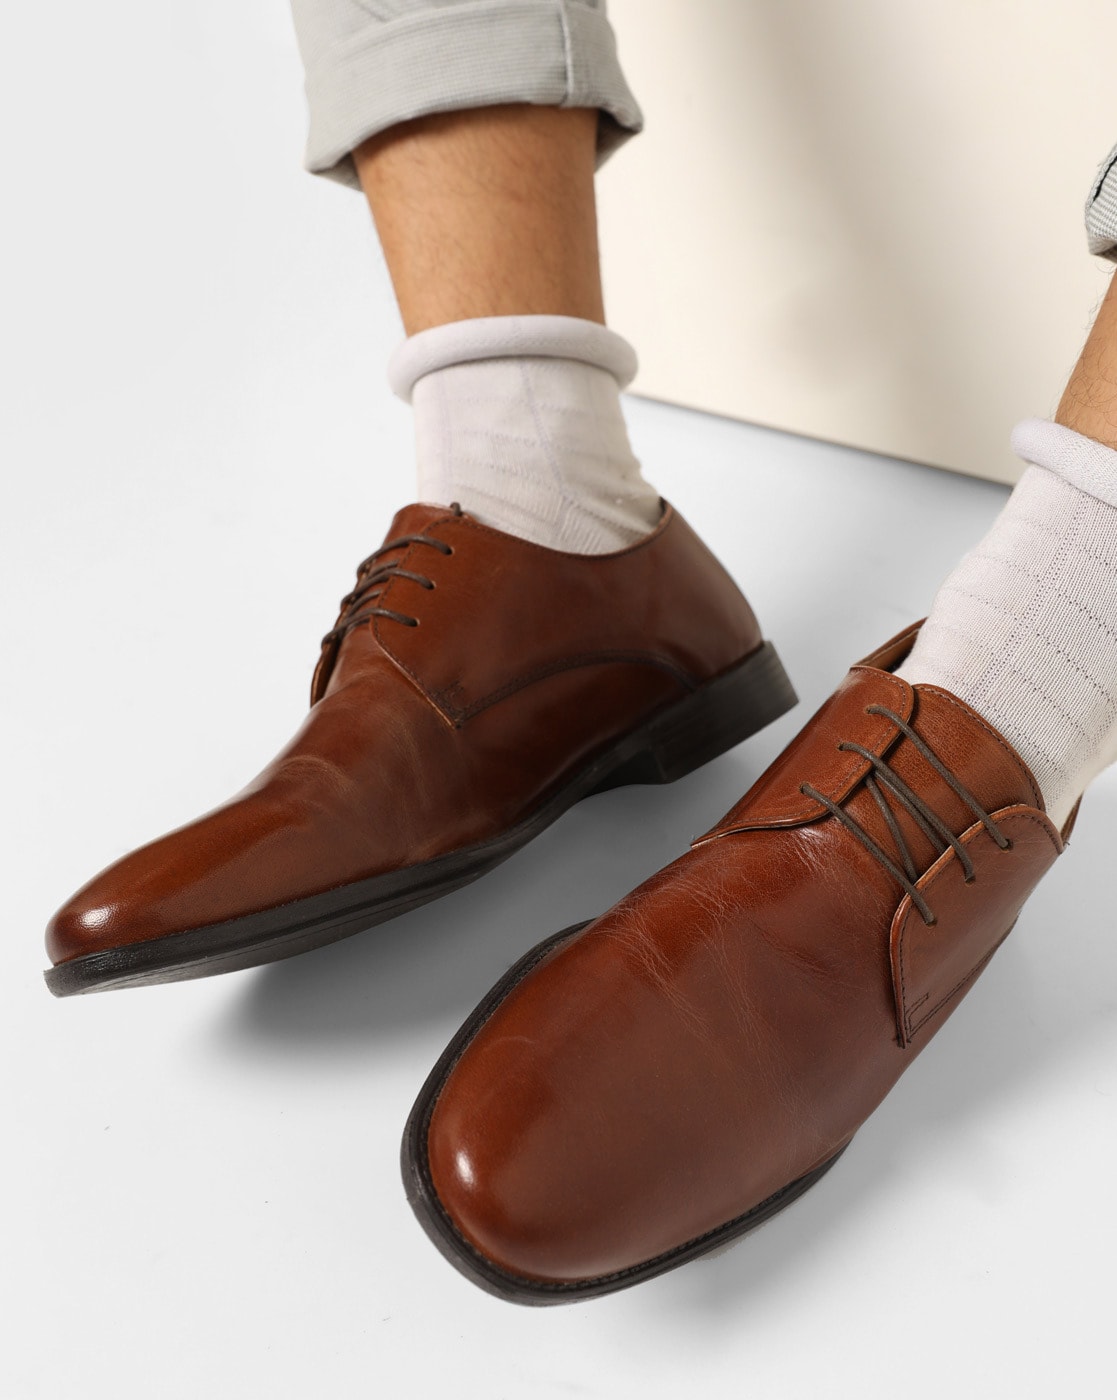 red tape derby formal shoes